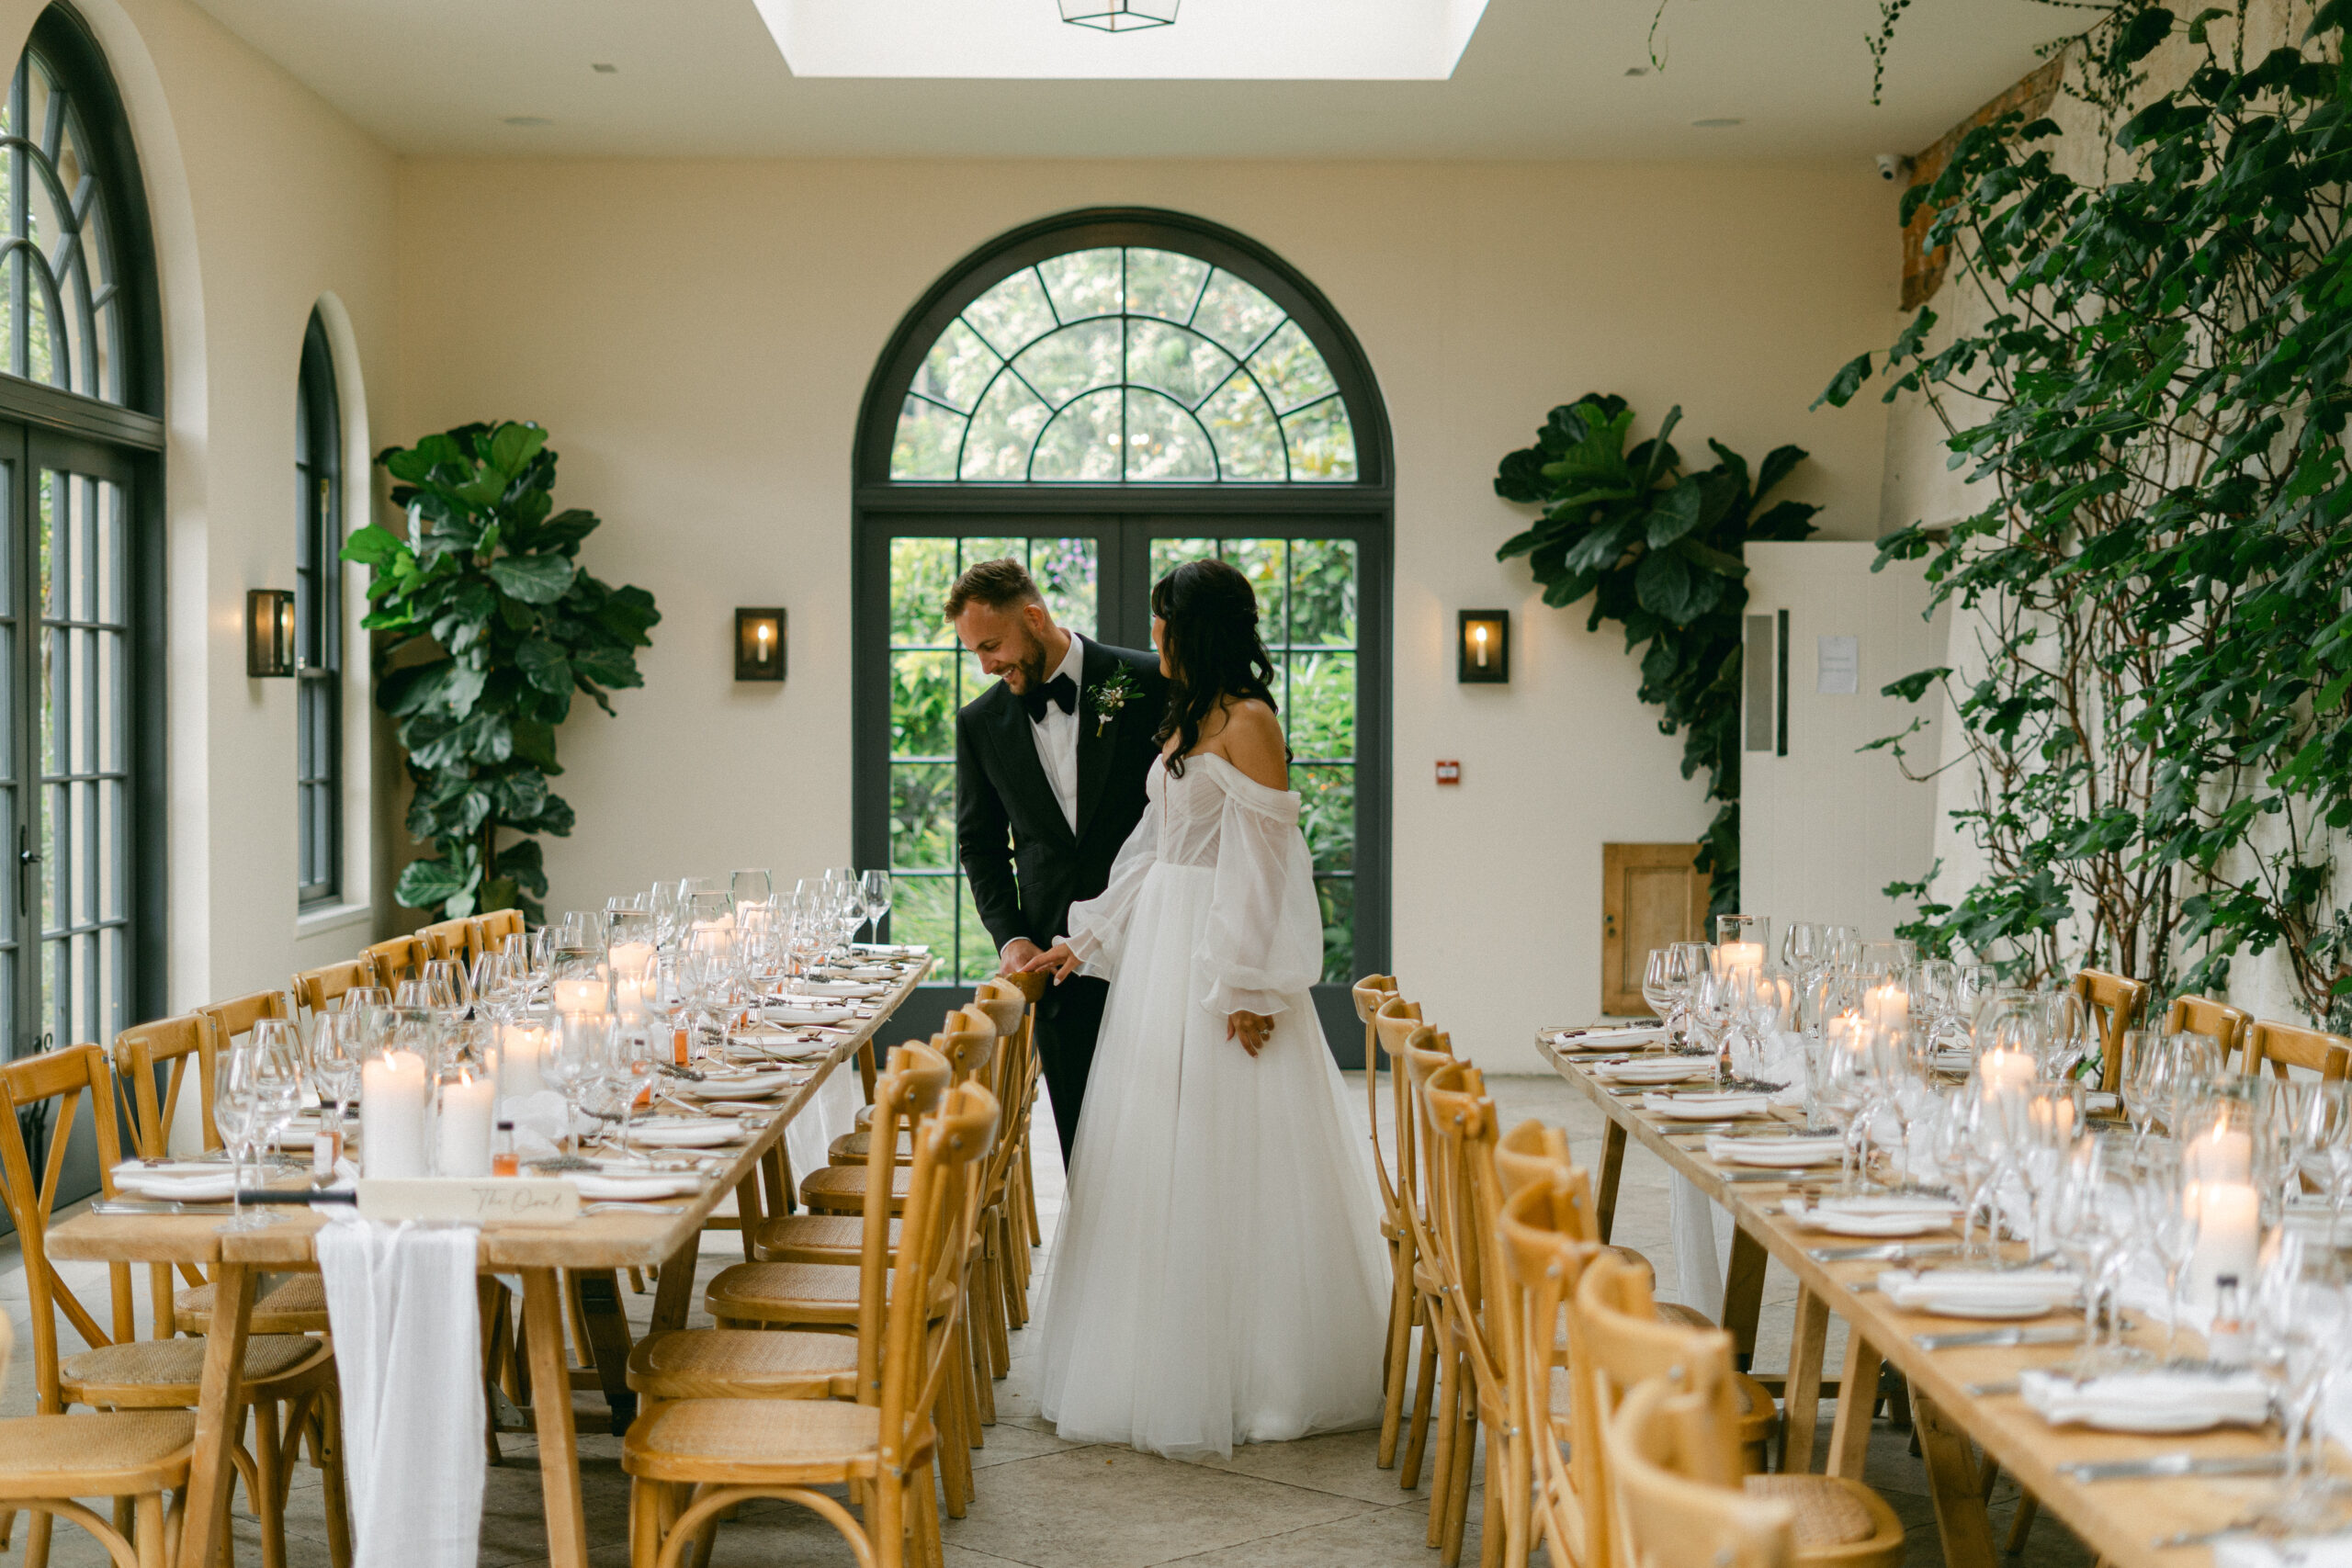 A bride & groom look at the details of their Fig House wedding reception at Middleton Lodge